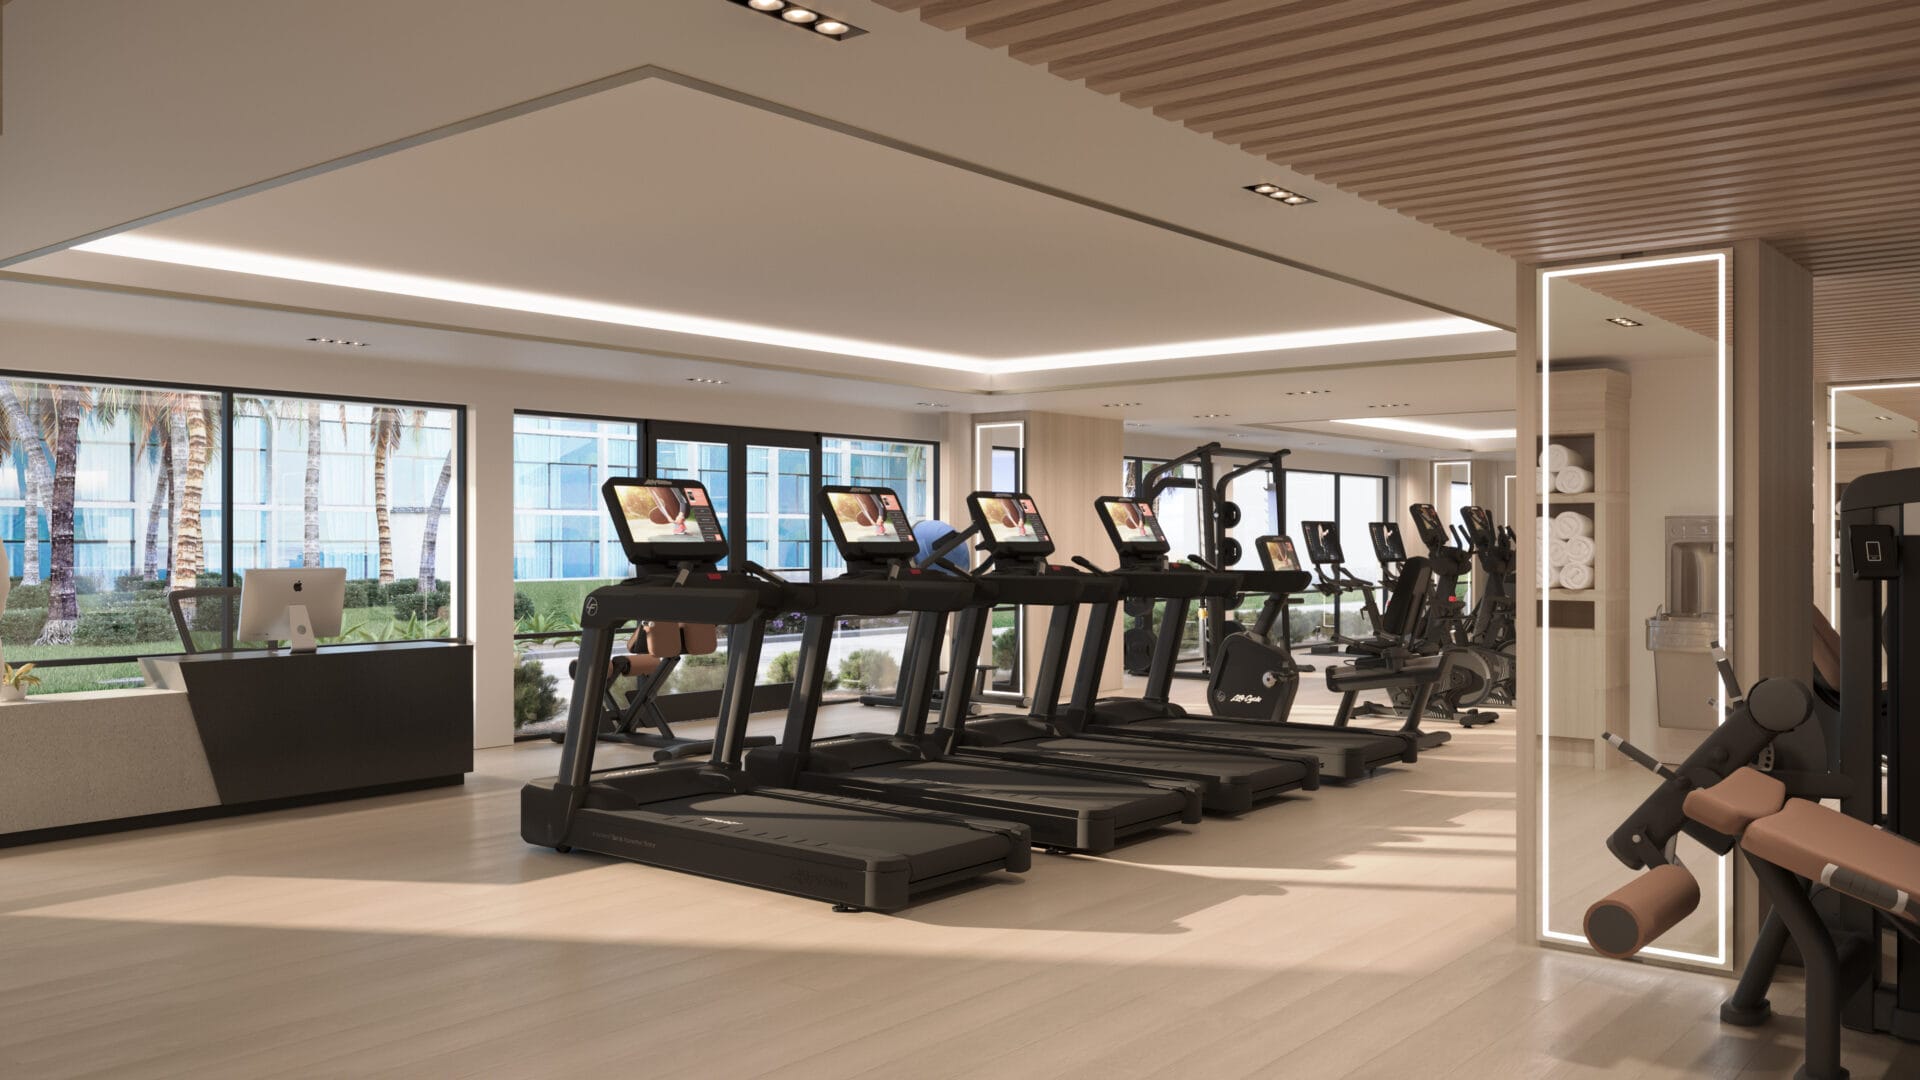 A gym with many treadmills and other equipment.